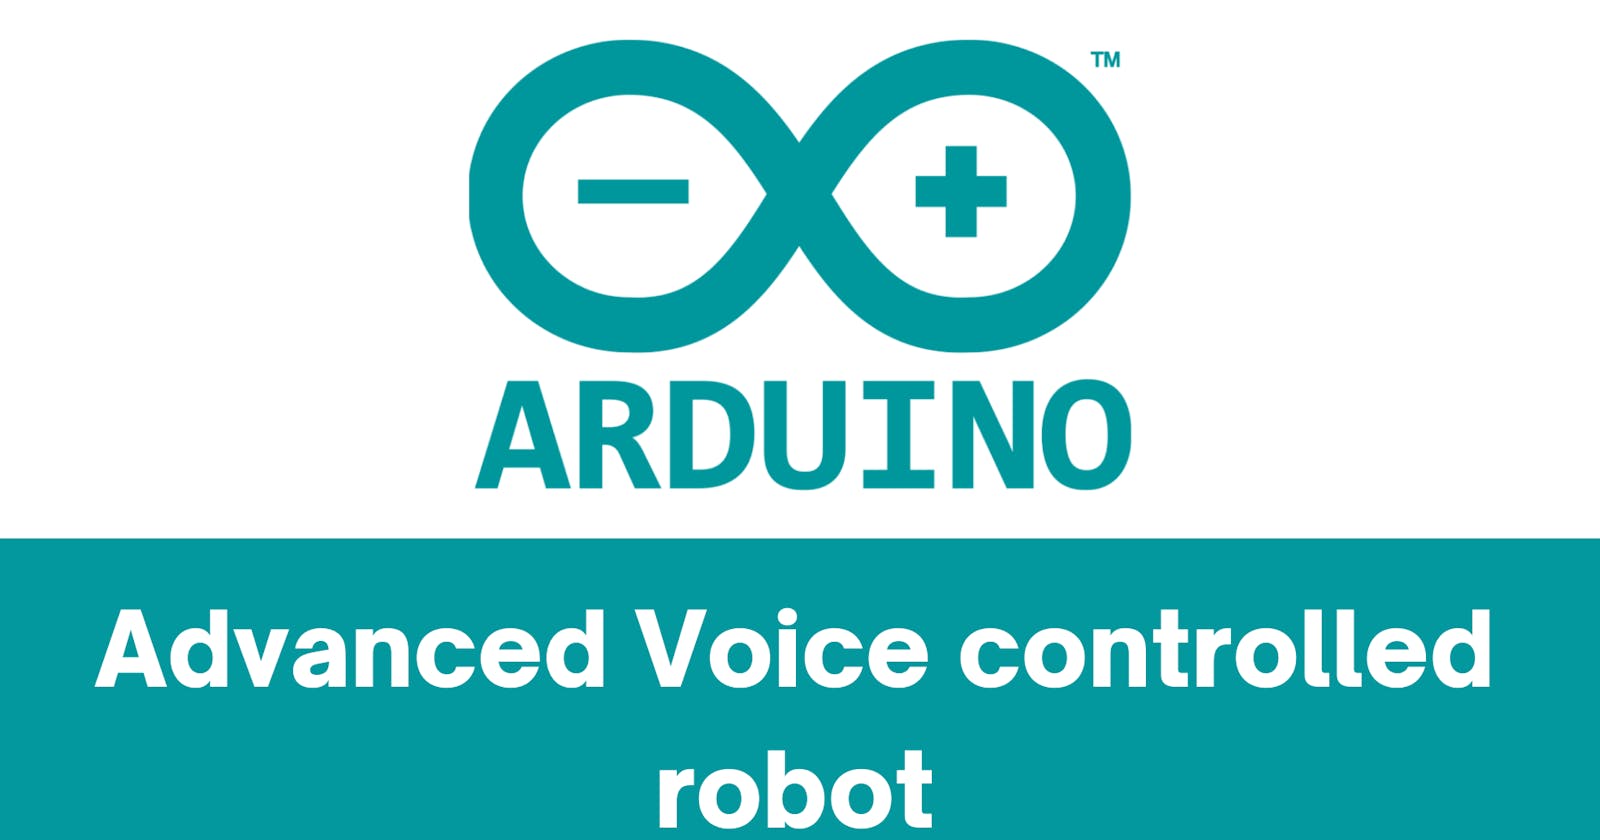 Advanced voice controlled robot